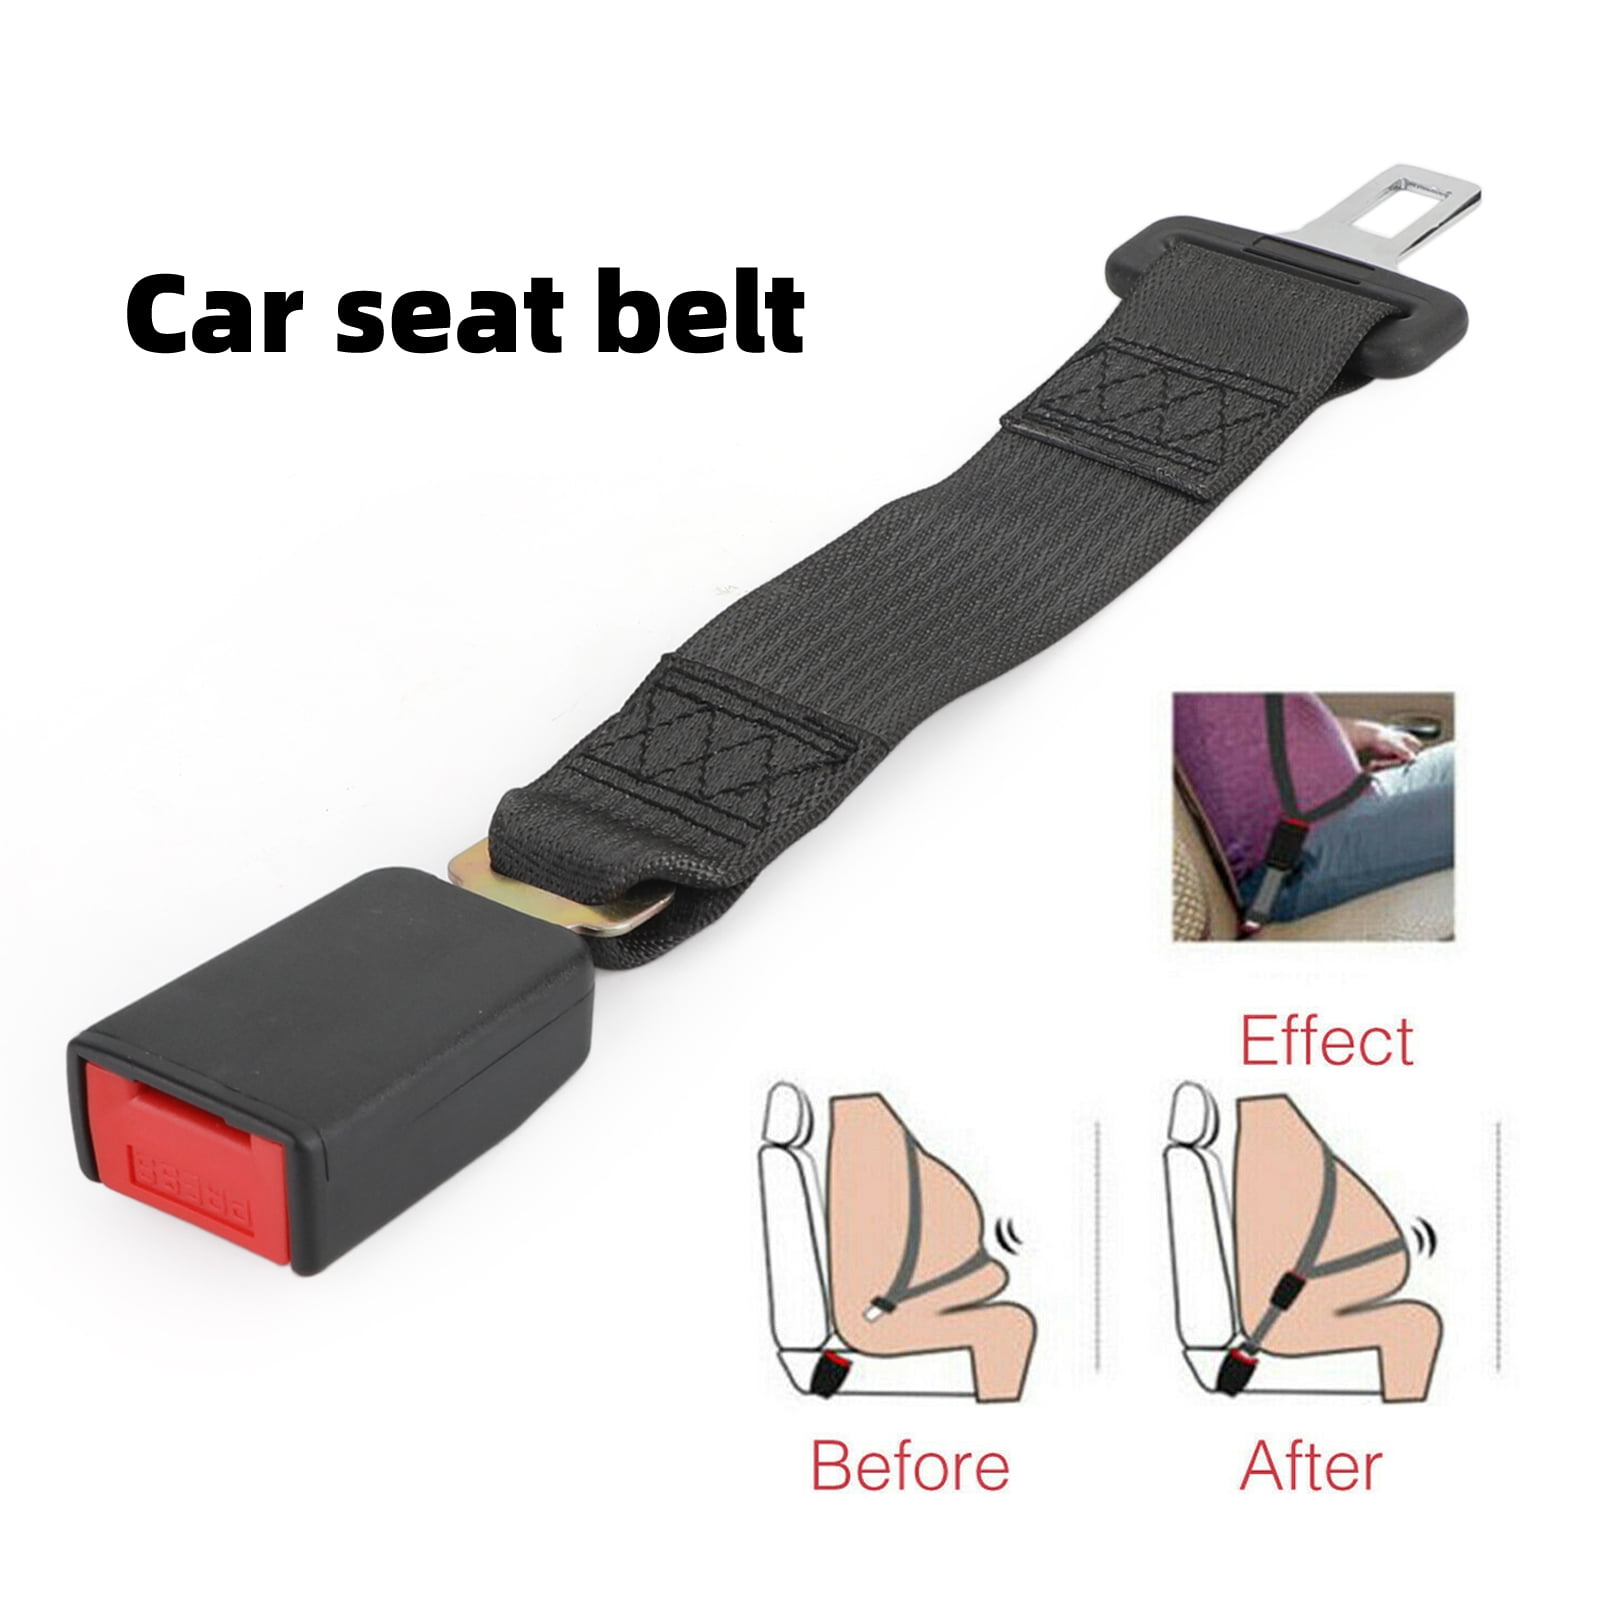 7/8 Inch Wide Metal Tongue, Type A Black, 1-Pack Click-and-Go to Drive Safely Seat Belt Extender Pros E4 Safety Certified Regular 10 Inch Seat Belt Extender 